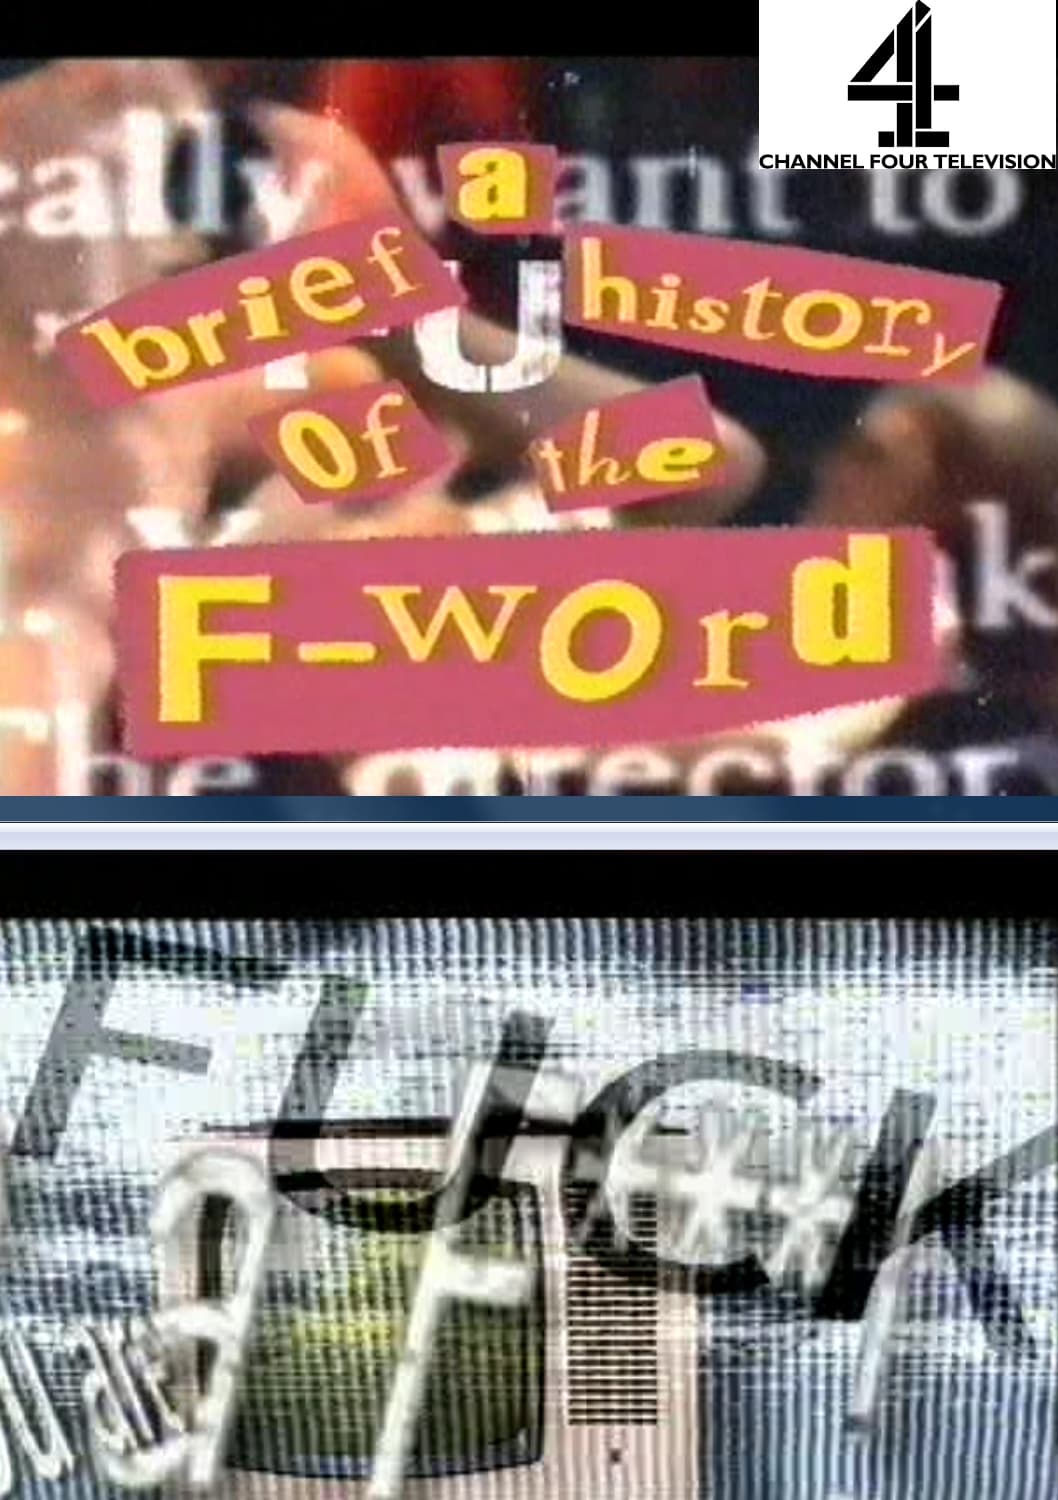 A Brief History of the F-Word